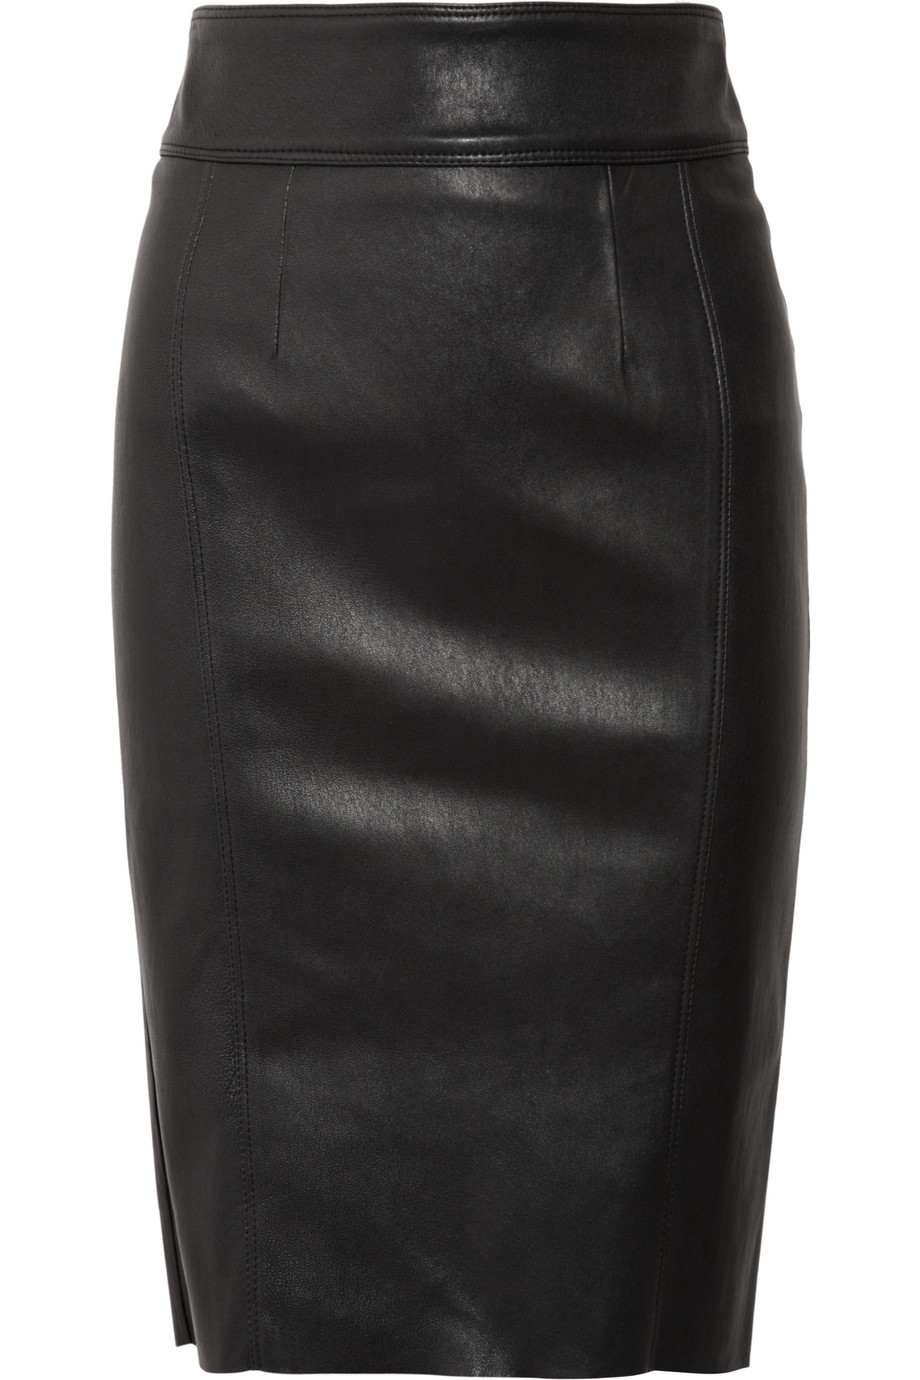 Burberry Stretch Leather Pencil Skirt In Black Lyst